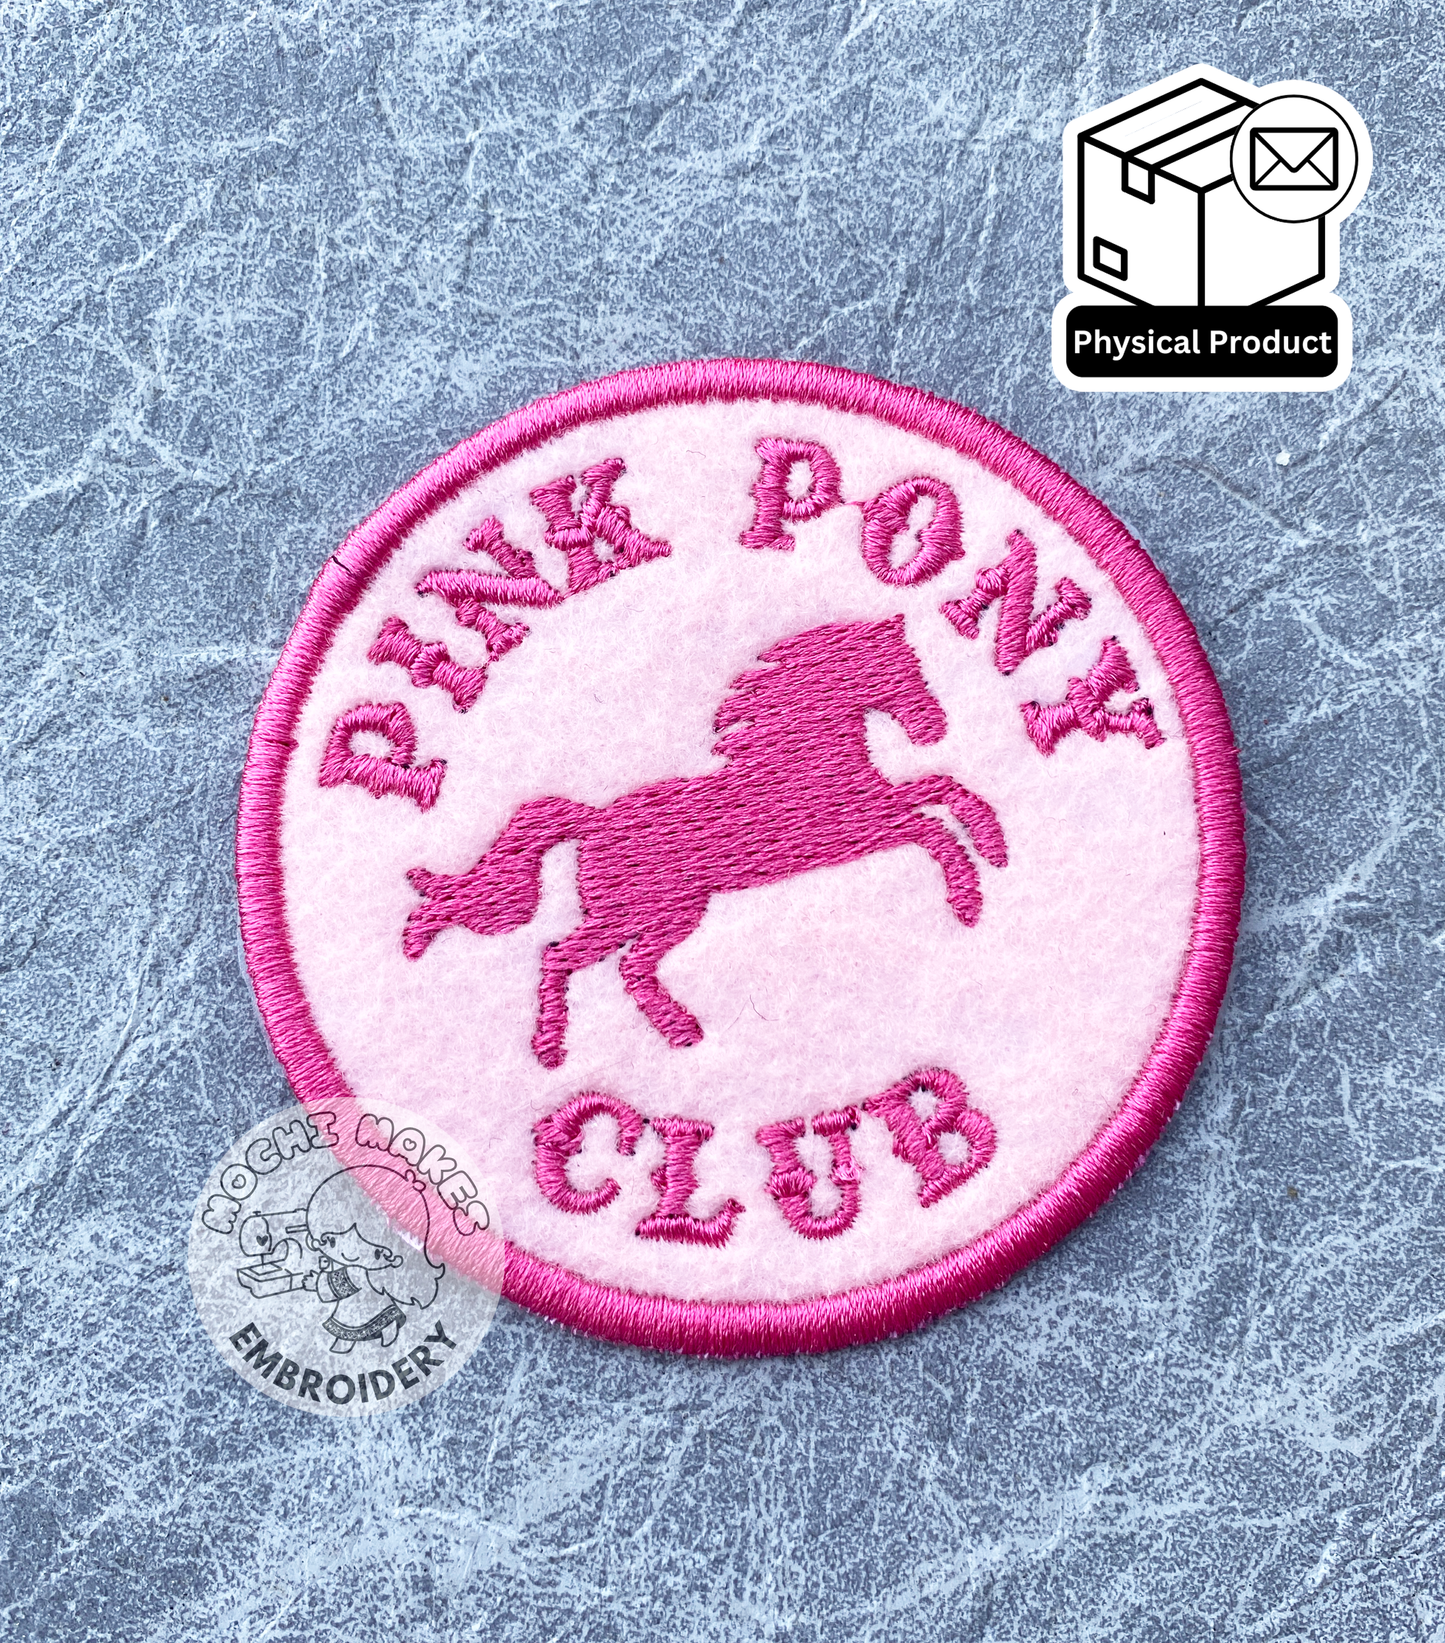 Pink Pony Club Chappell Roan Western Rodeo Singer Embroidered Patch Music Queer Pop Pride LGBTQIA Gay Lesbian Midwest Princess Pink